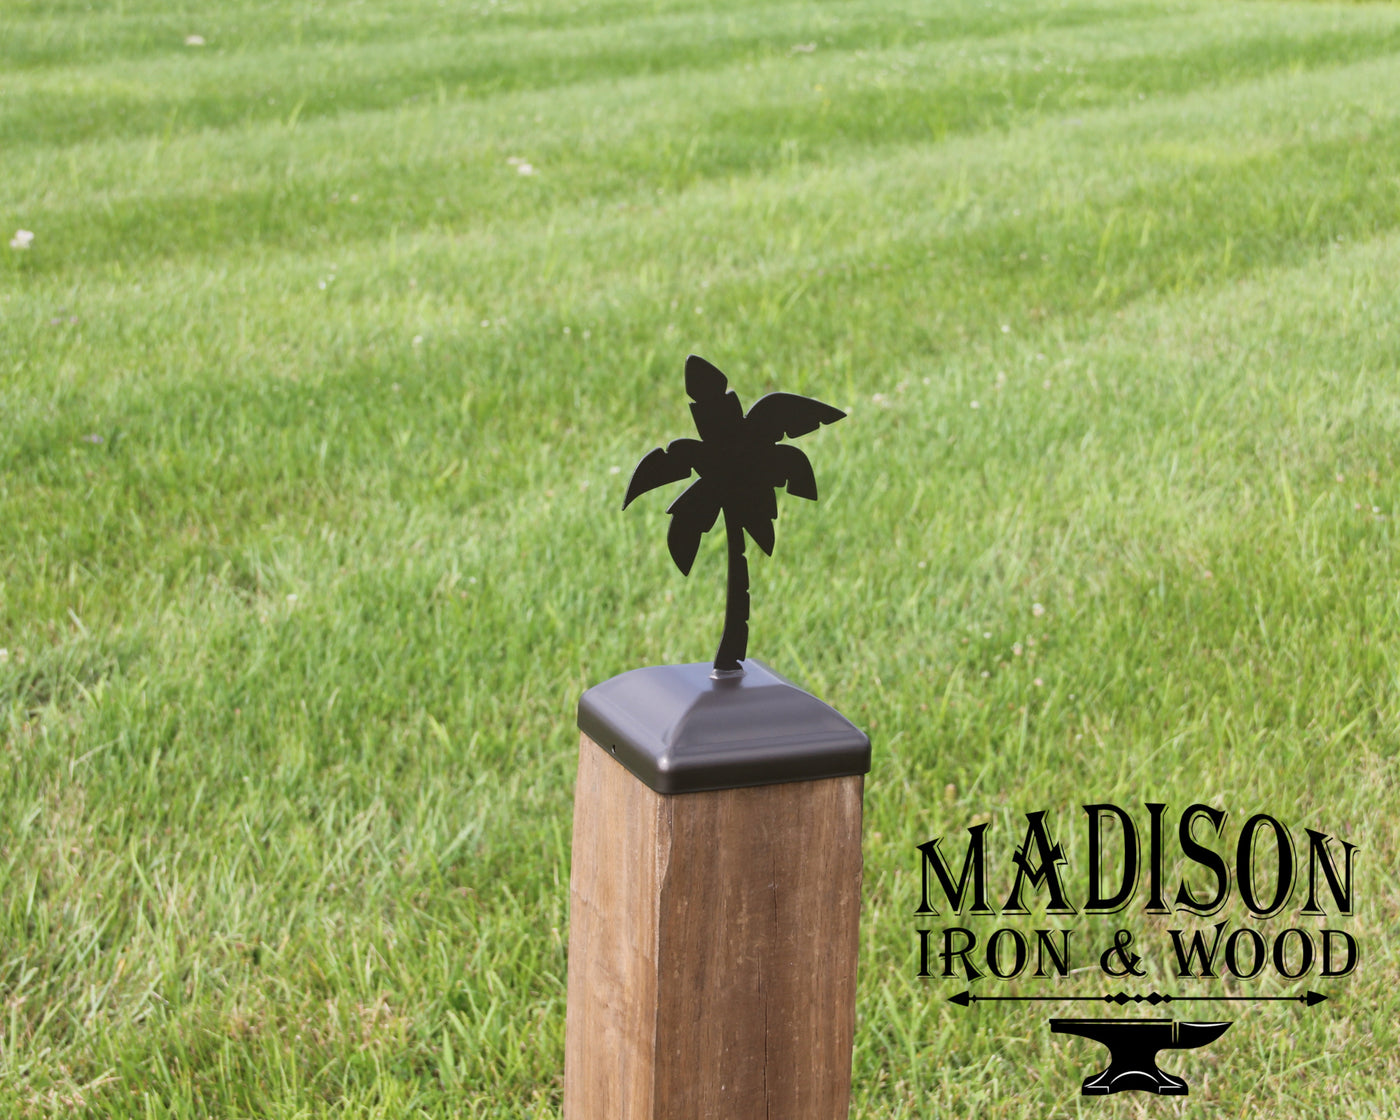 6x6 Palm Tree Post Cap - Madison Iron and Wood - Post Cap - metal outdoor decor - Steel deocrations - american made products - veteran owned business products - fencing decorations - fencing supplies - custom wall decorations - personalized wall signs - steel - decorative post caps - steel post caps - metal post caps - brackets - structural brackets - home improvement - easter - easter decorations - easter gift - easter yard decor